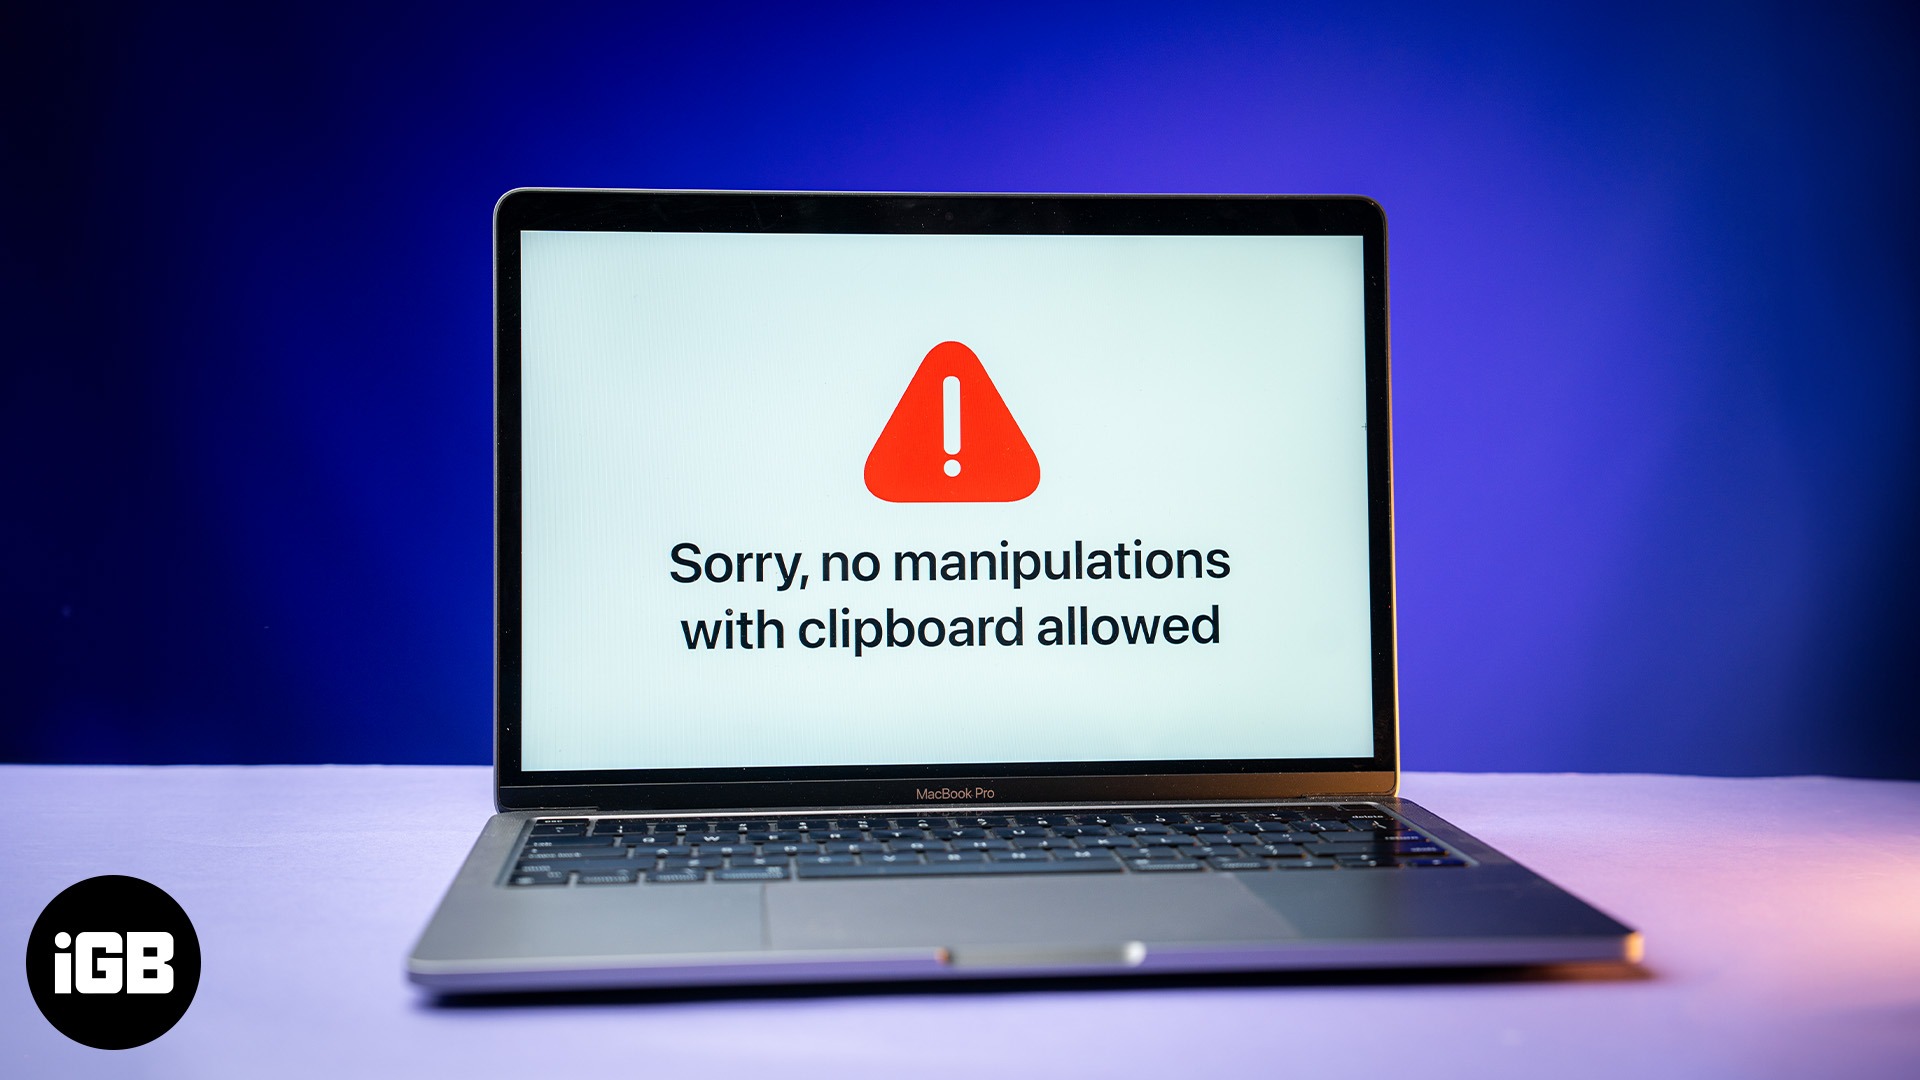 How to fix “Sorry, No Manipulations With Clipboard Allowed” on a Mac